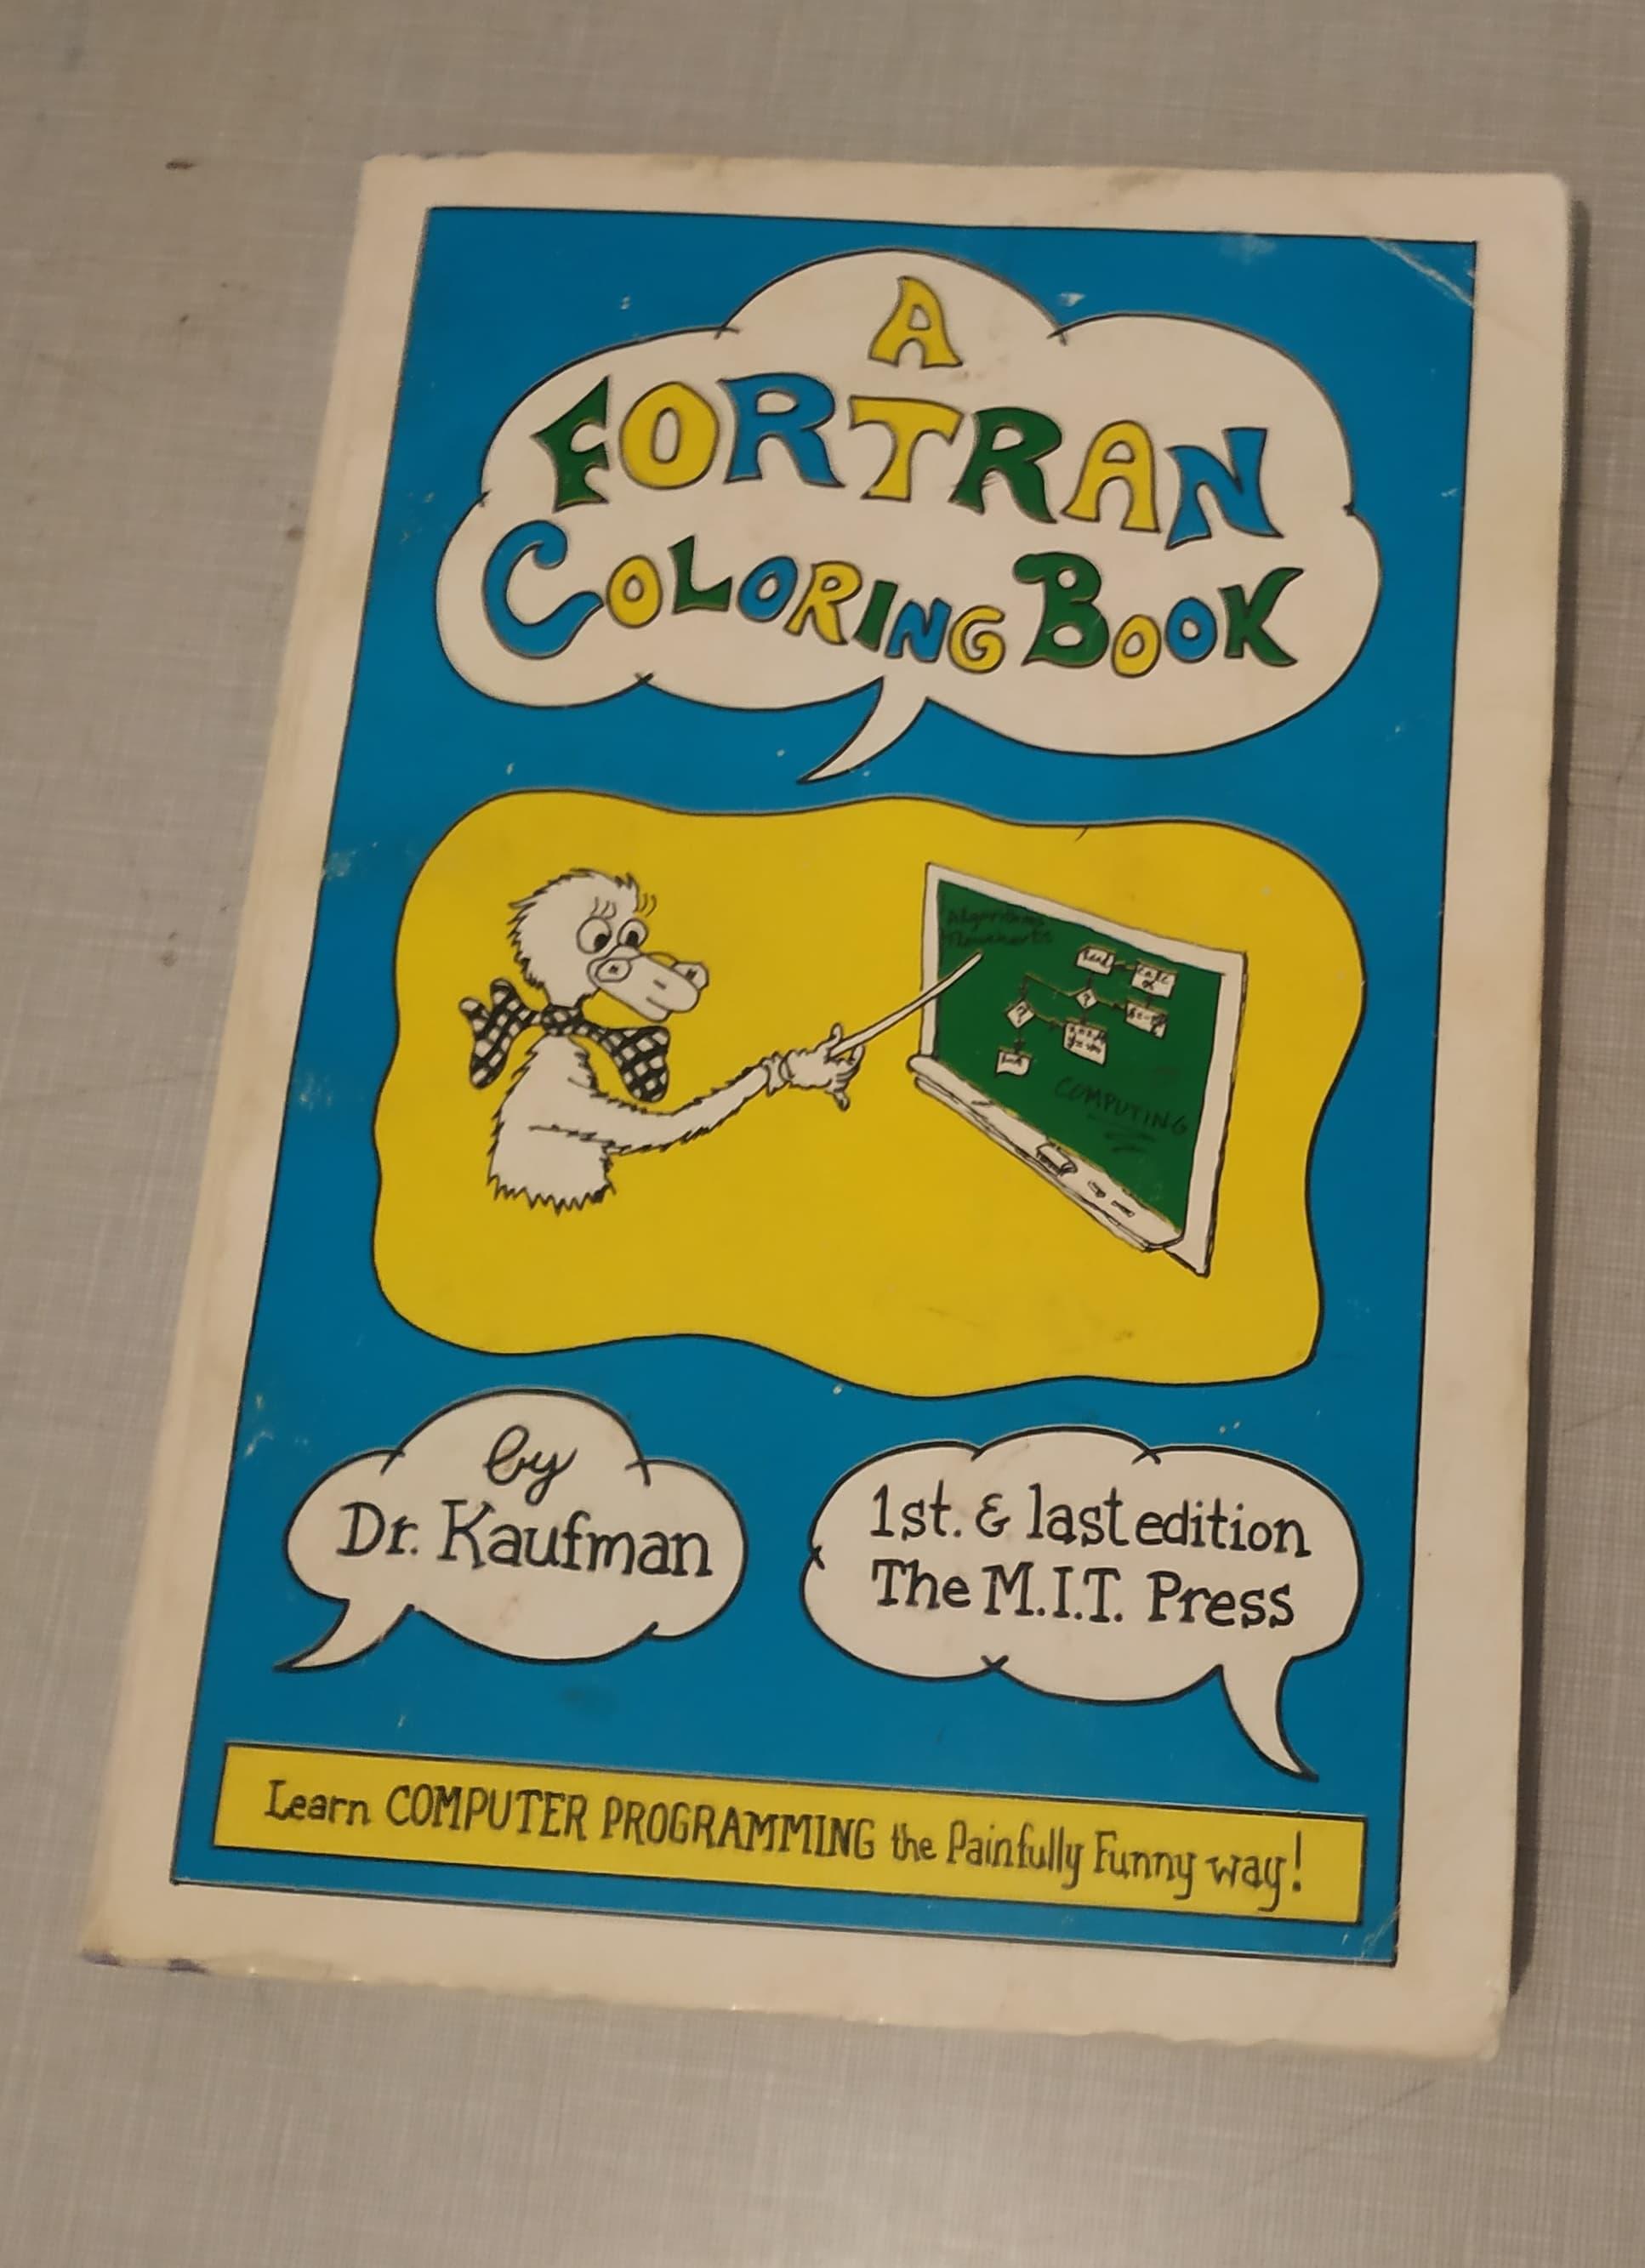 A FORTRAN Coloring Book by Dr. Kaufman, 1st and last edition The MIT Press. Learn Computer Programming the Painfully Funny way!